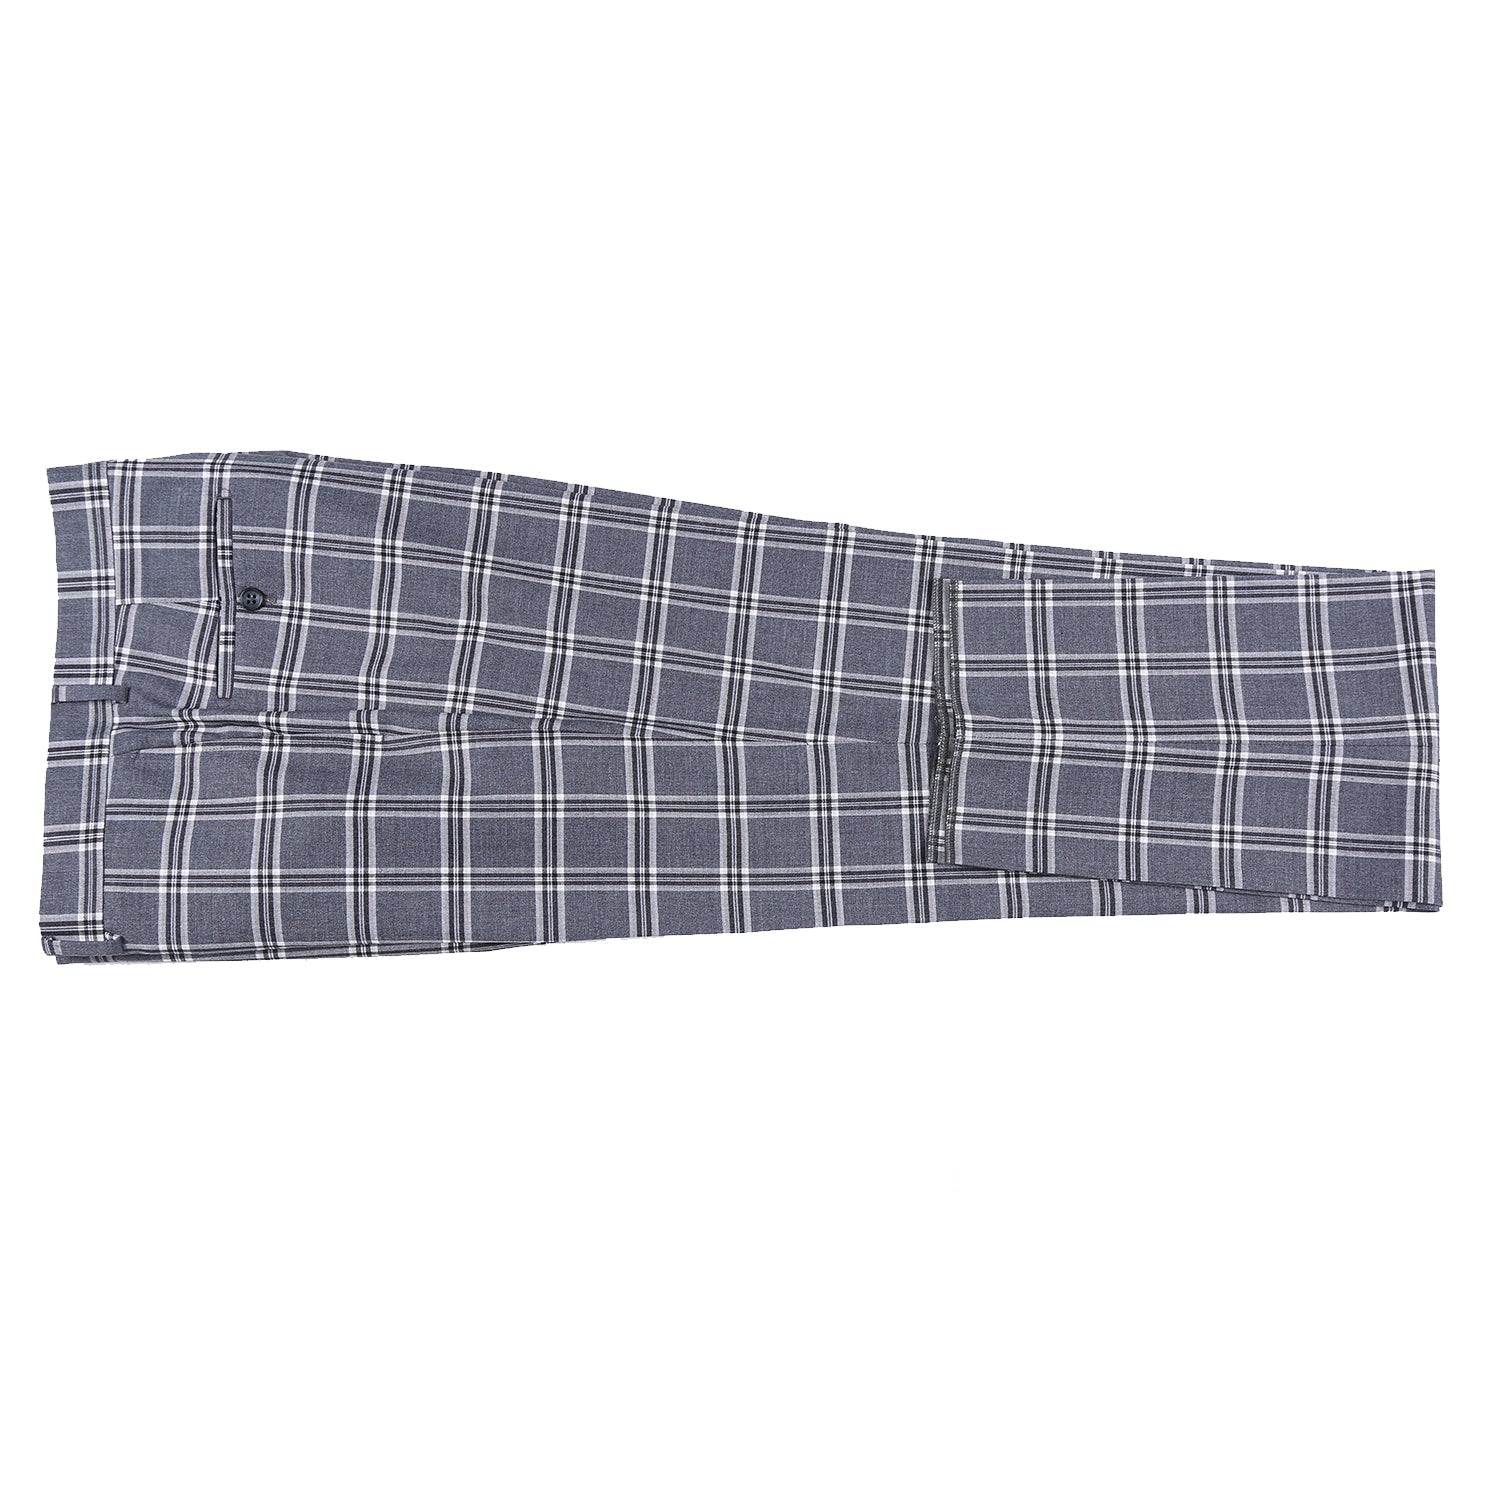 Stretch Performance Double Breasted SLIM FIT Suit in Grey Plaid (Short, Regular, and Long Available) by English Laundry